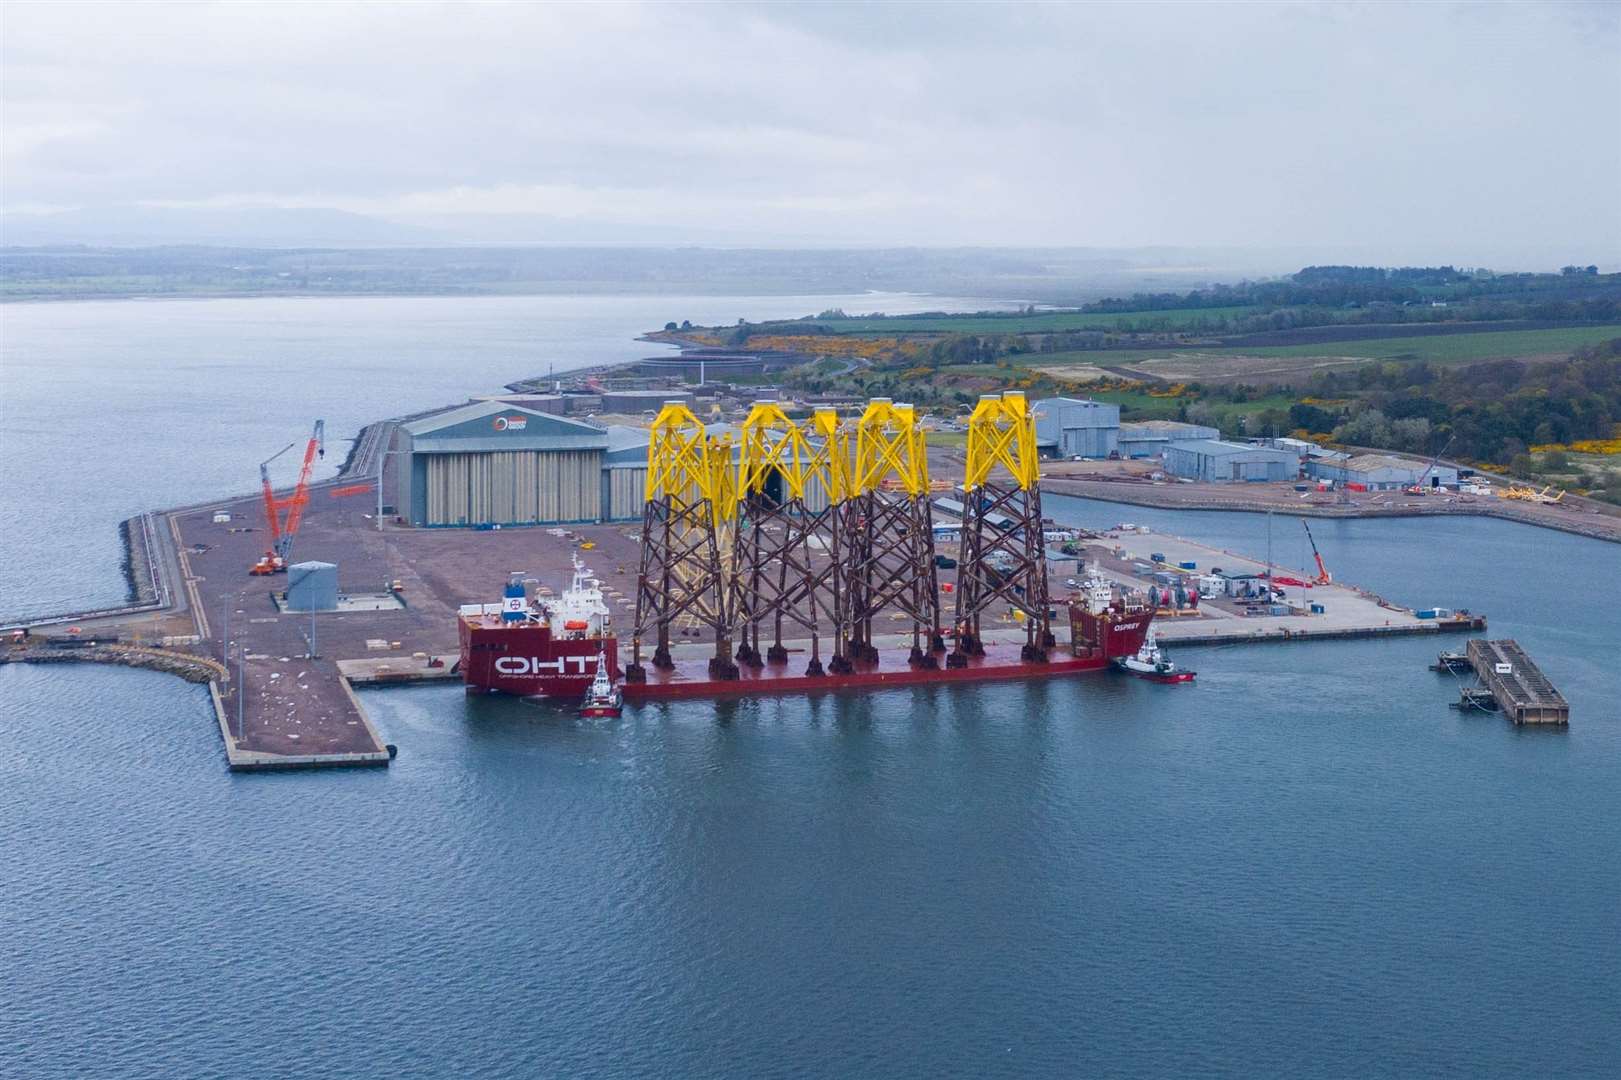 The delivery arrives at the Port of Nigg.